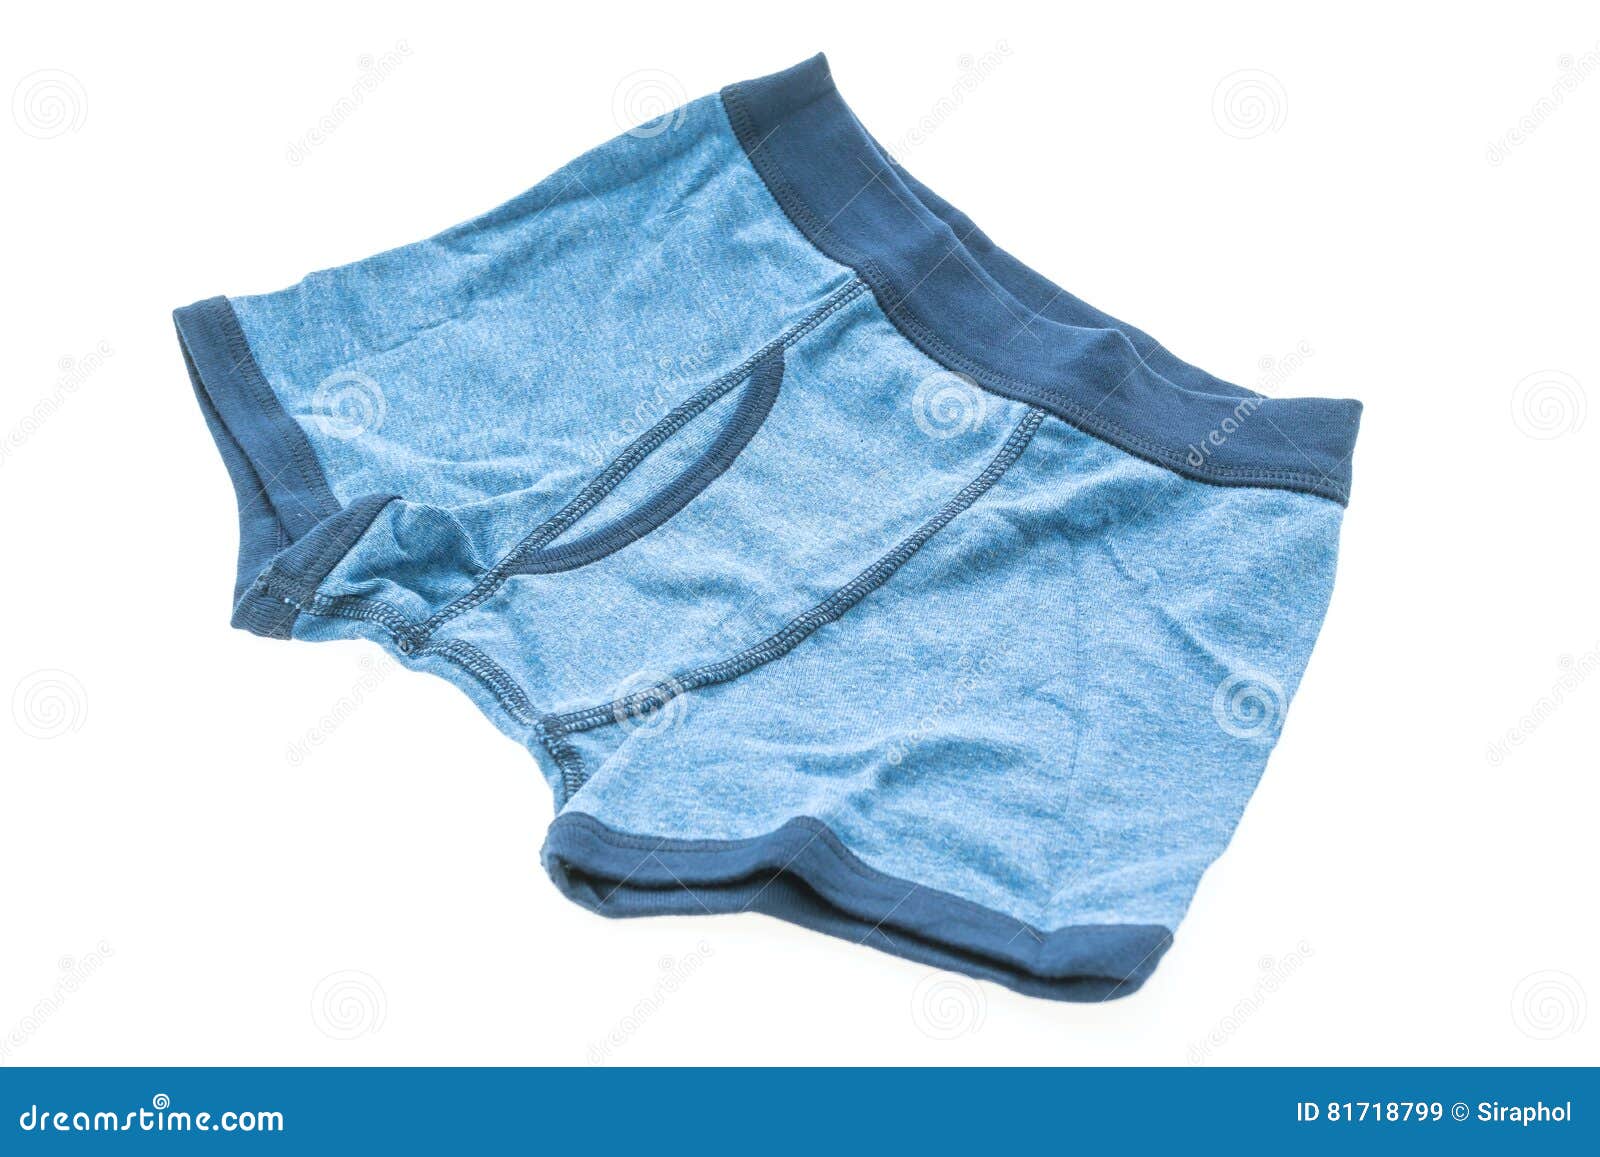 Short Underwear for Kid and Boy Stock Image - Image of underclothes ...